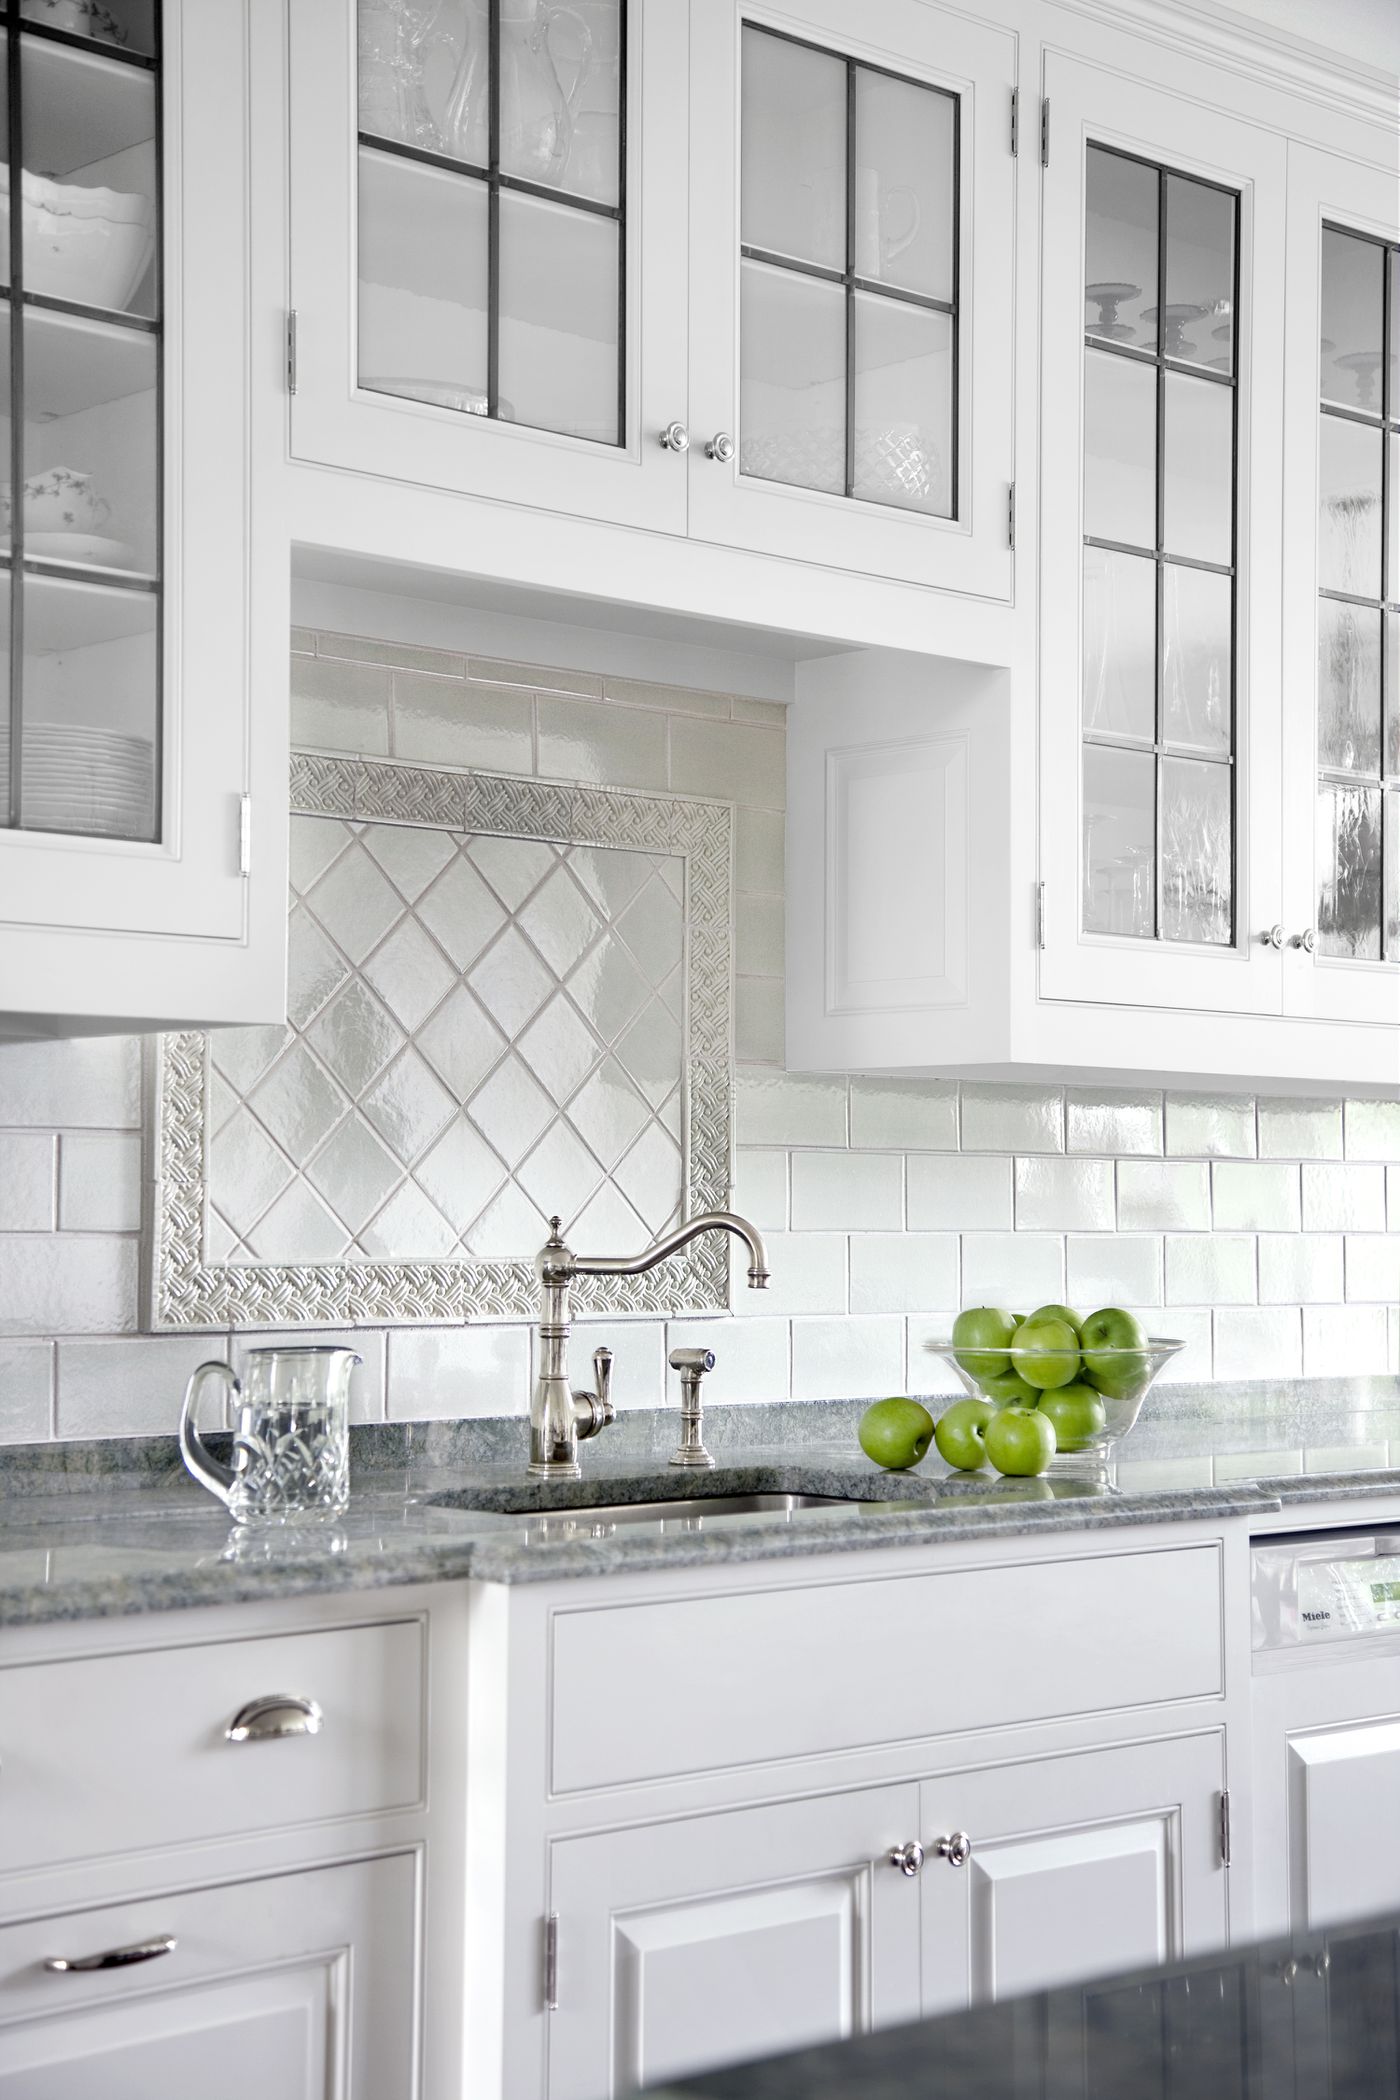 All About Ceramic Subway Tile   This Old House